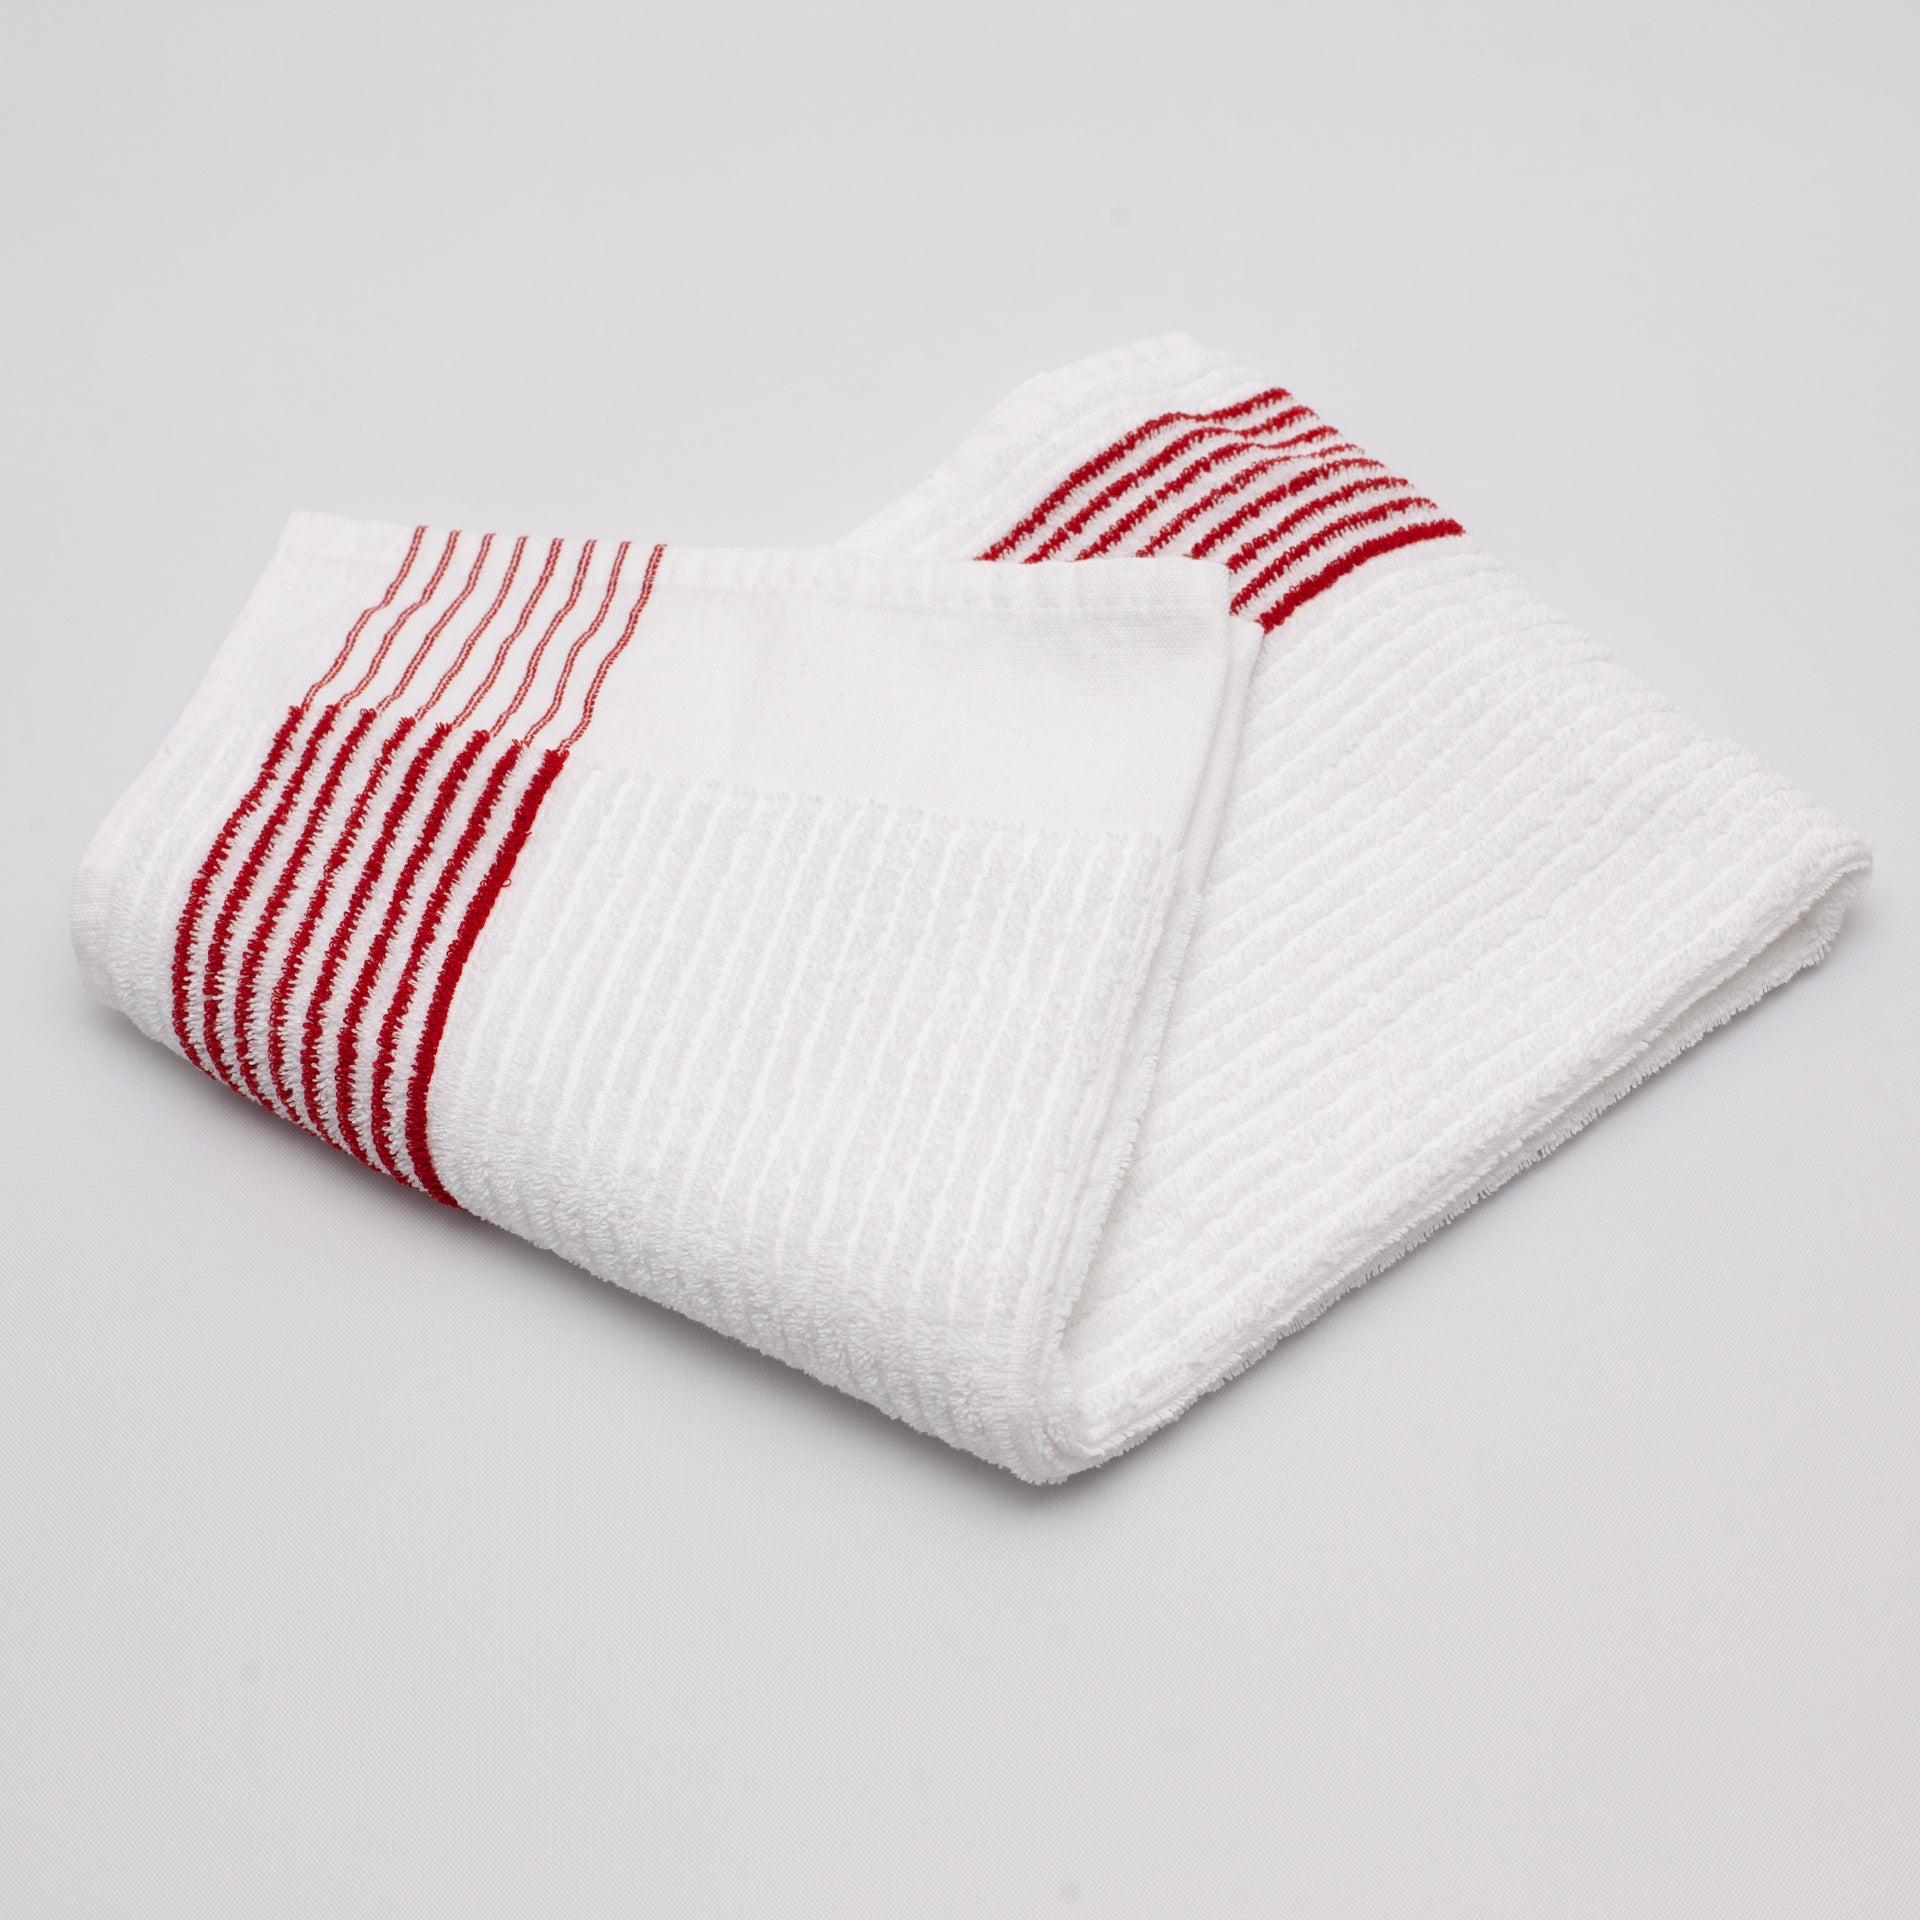 golf caddy towel for golf with 8 ed stripes on a white background 